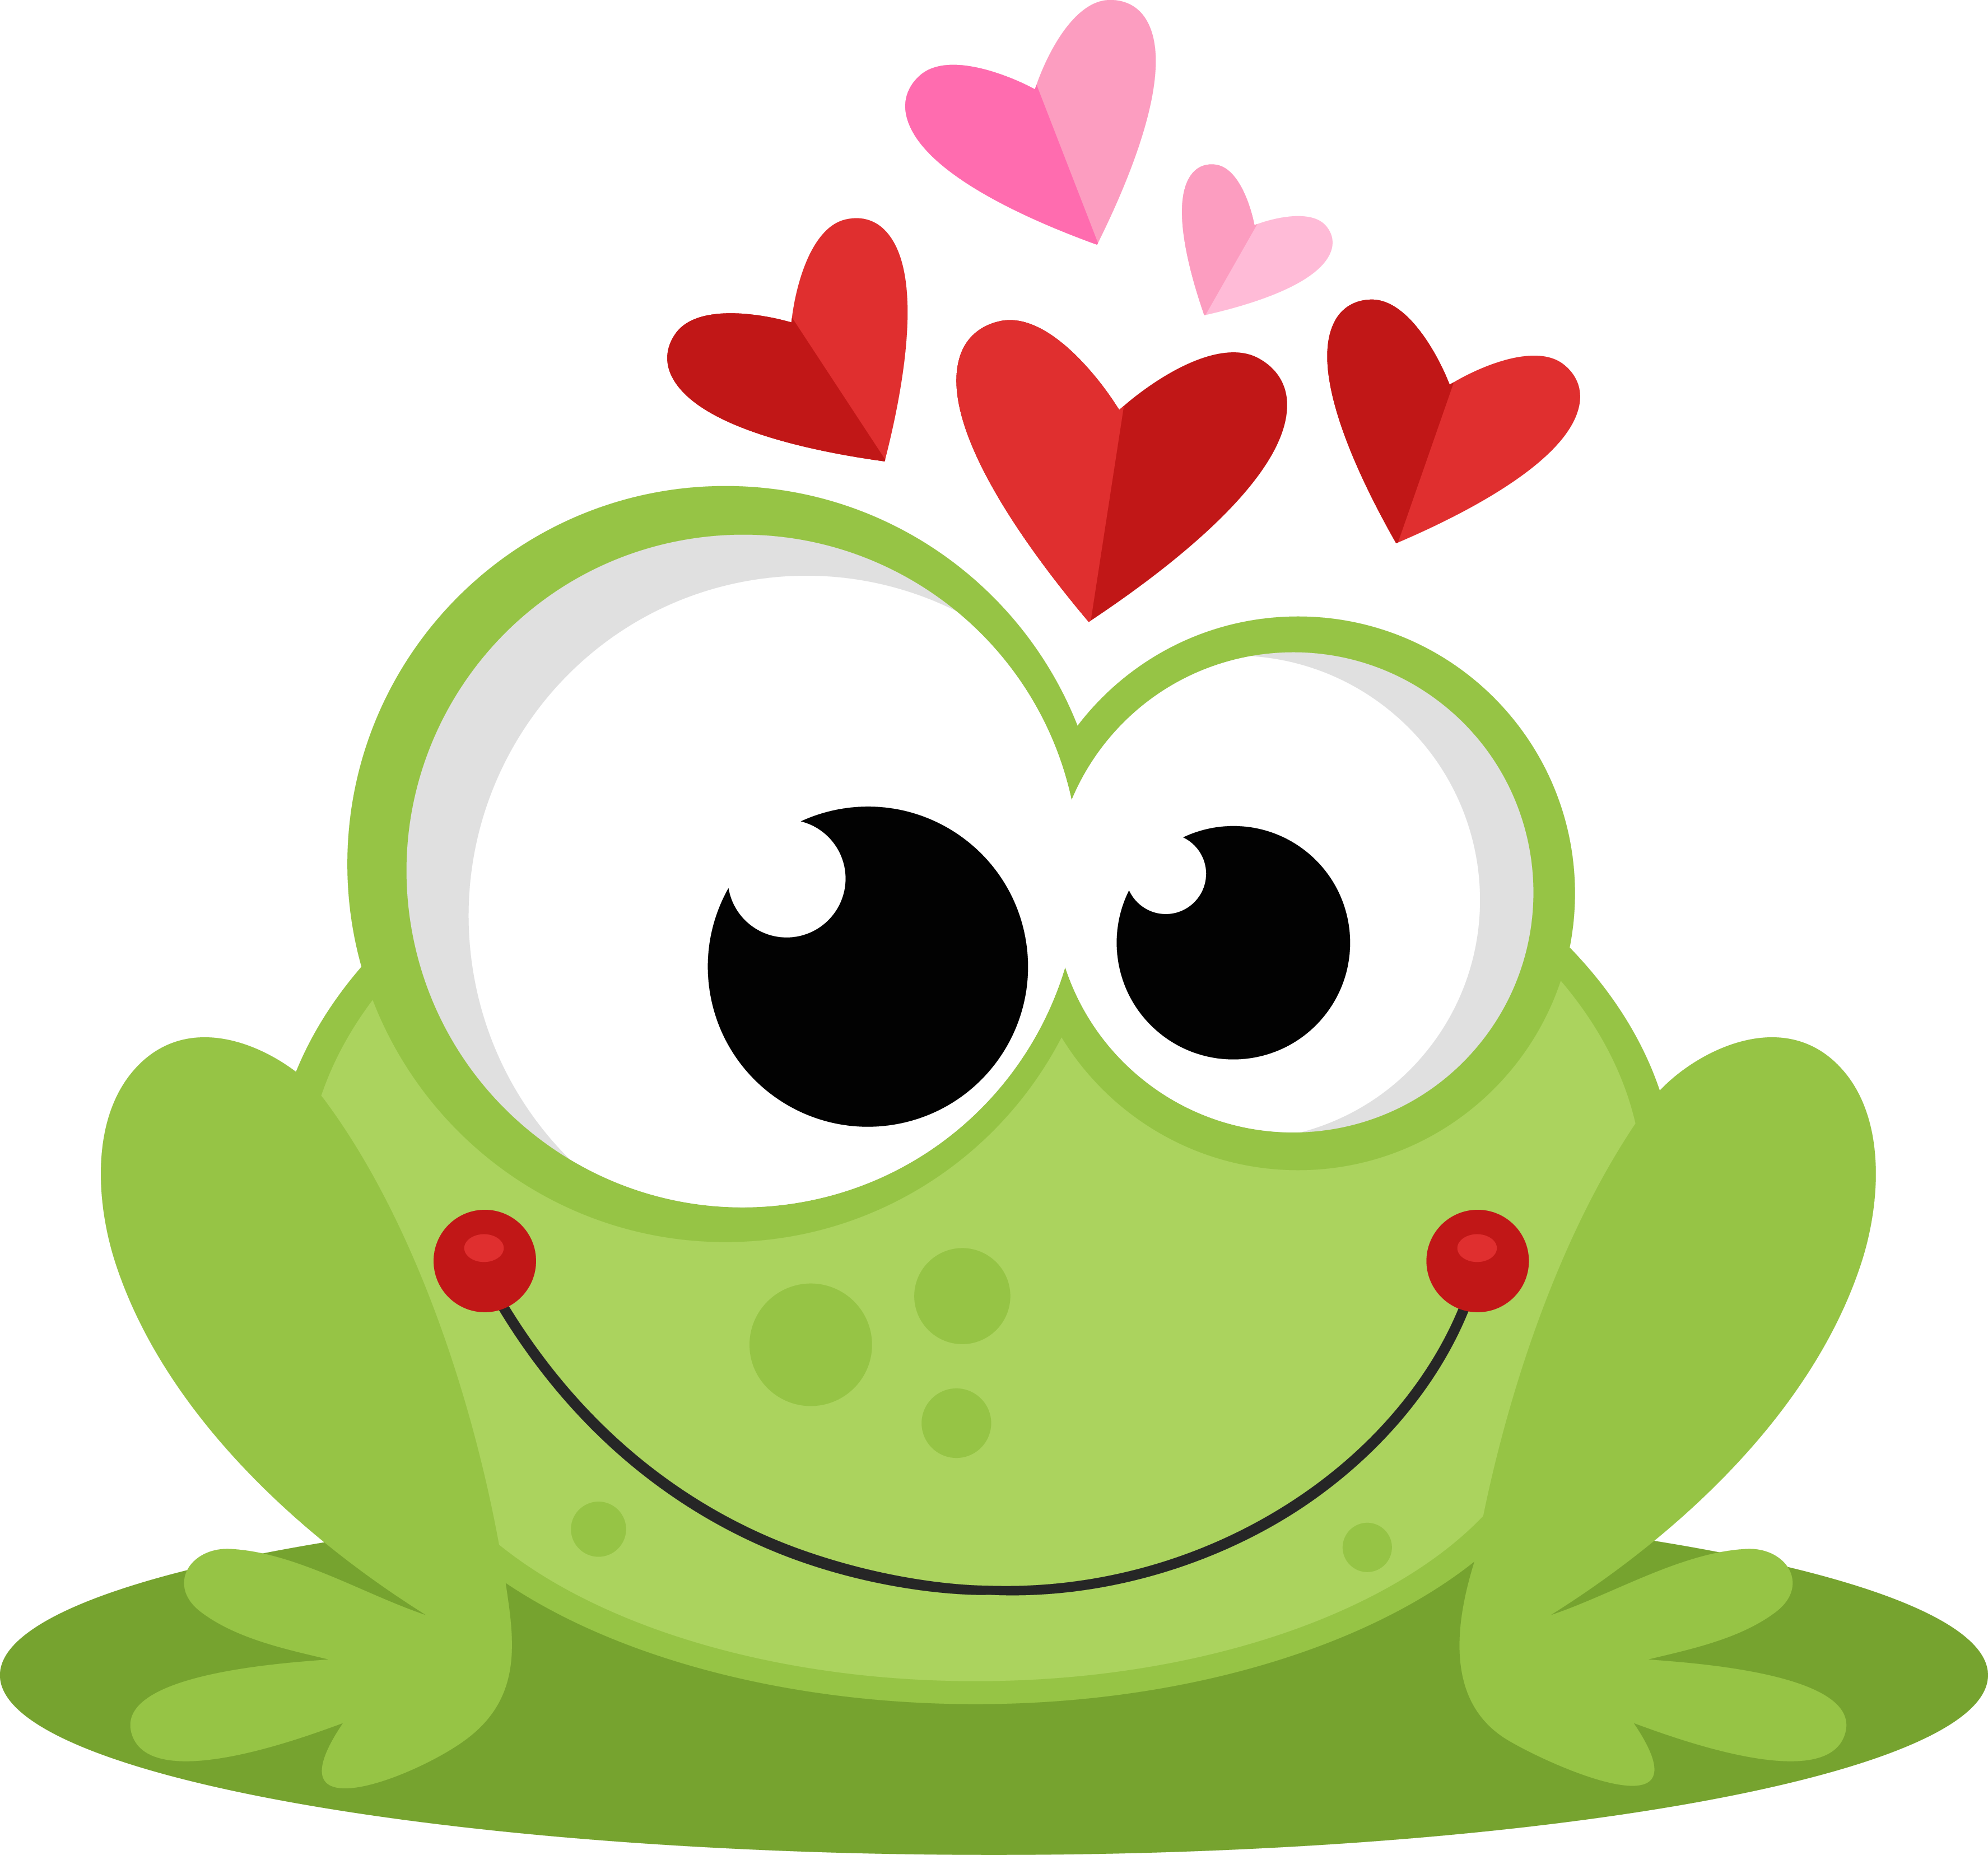 More Information - Frog In Love (3549x3312)